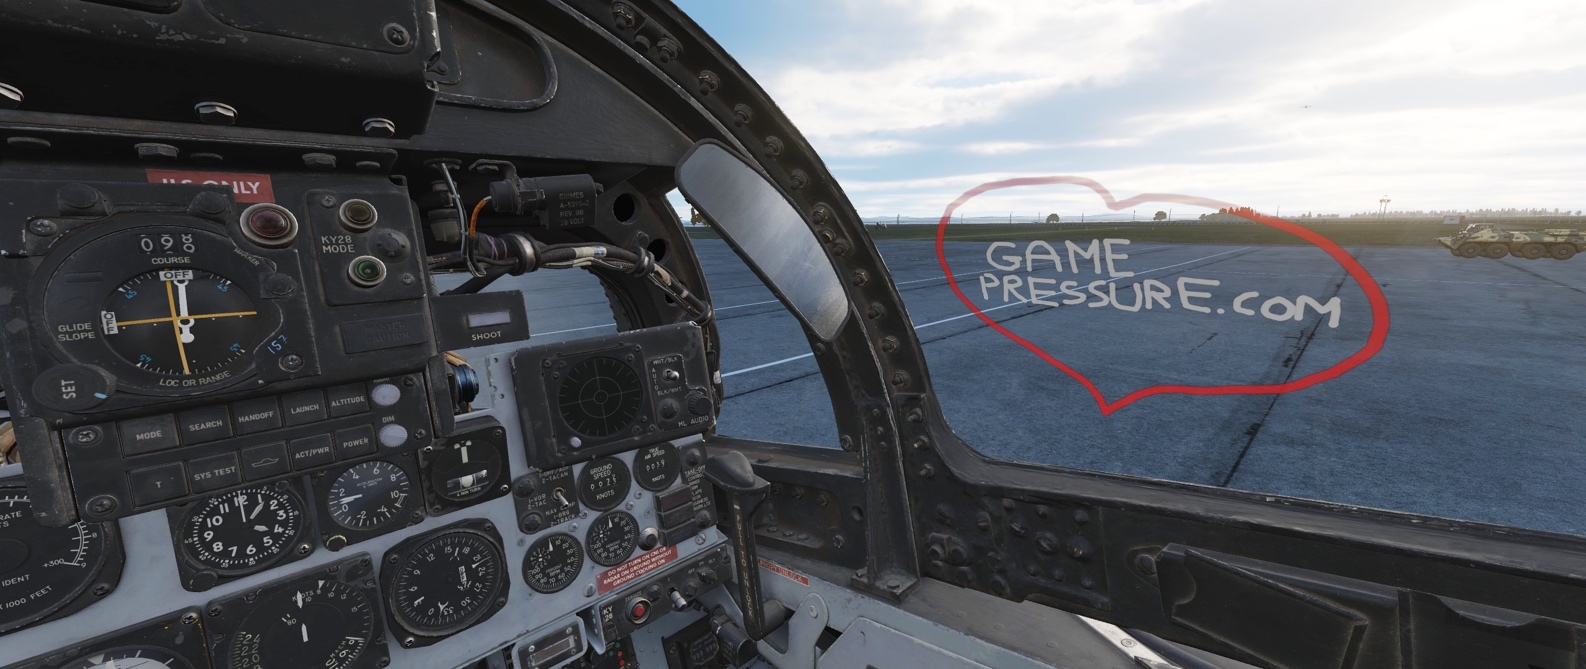 Drawing on the canopy is not just a humorous addition. Phantom crews really used marks on the glass for faster target location. - Experts in Realism, Household Name Synonymous With Quality - Conversation With Heatblur Team - dokument - 2024-03-11